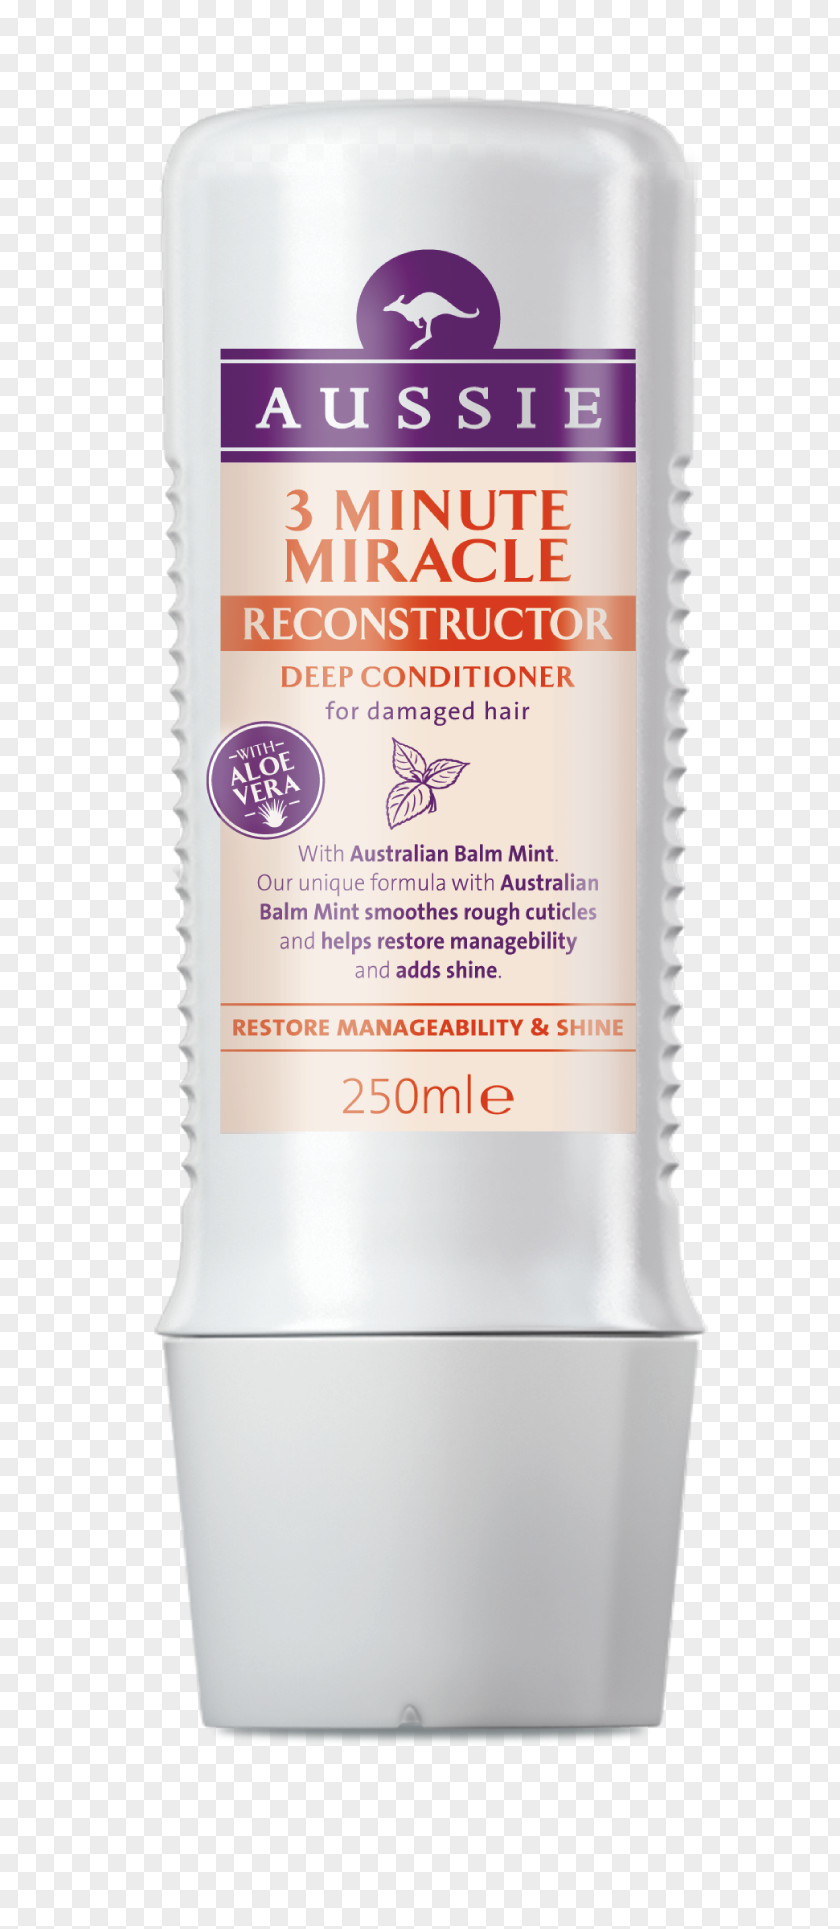 Hair Aussie 3 Minute Miracle Moist Conditioner Shampoo PNG